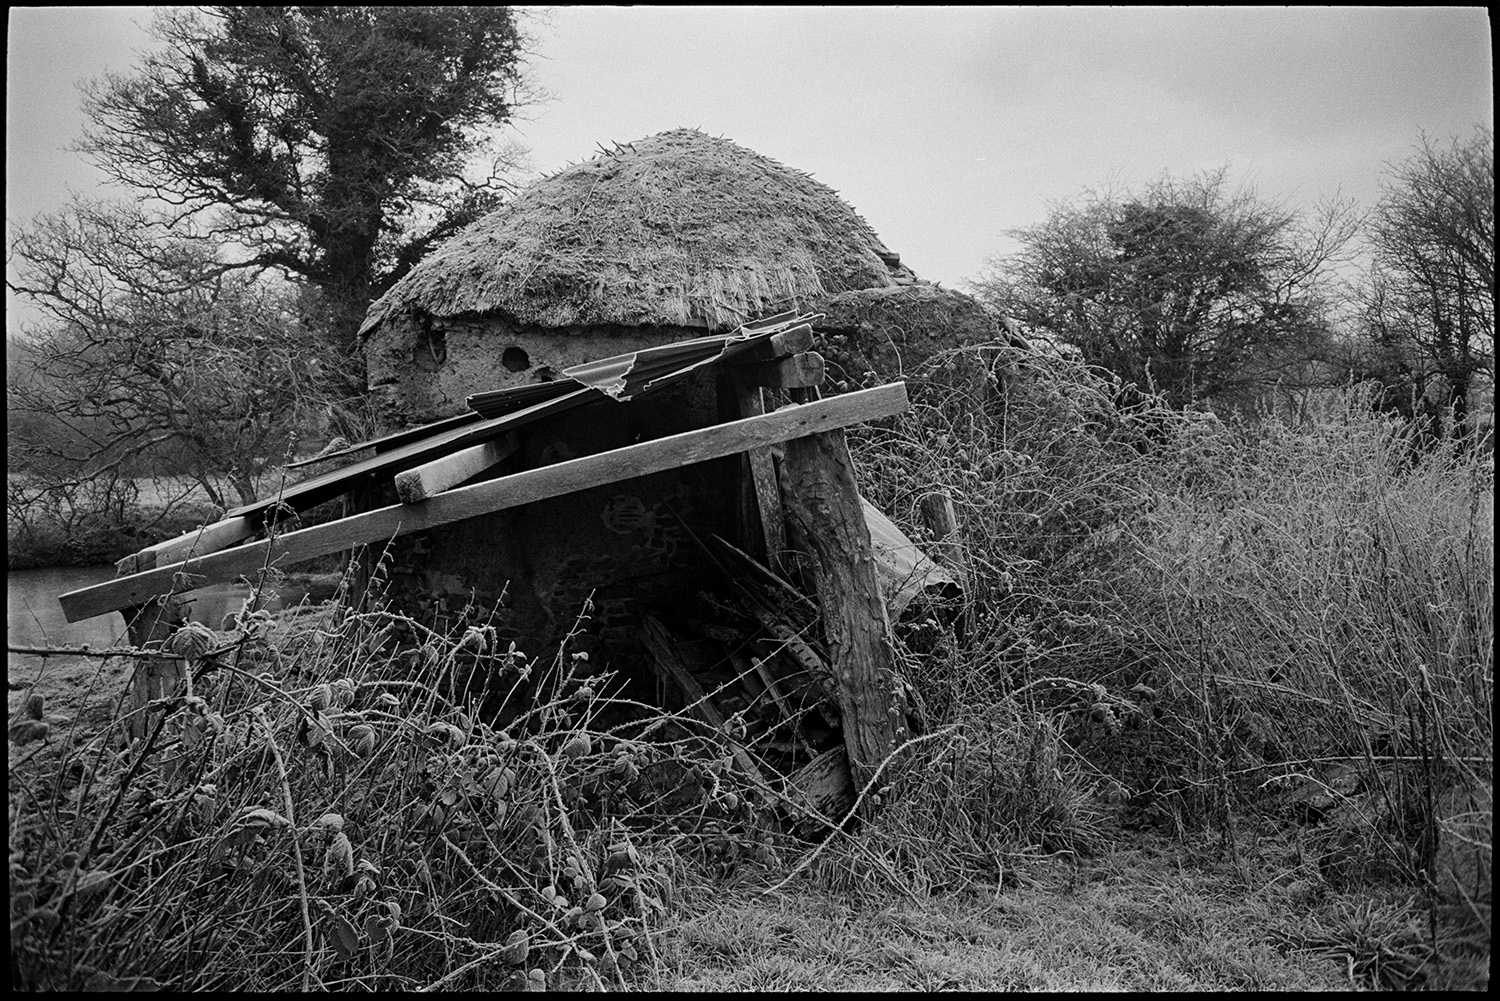 Collapsed cob and thatch barns.
[An overgrown collapsed cob and thatch barn in a field at Middle Week, Iddesleigh.]